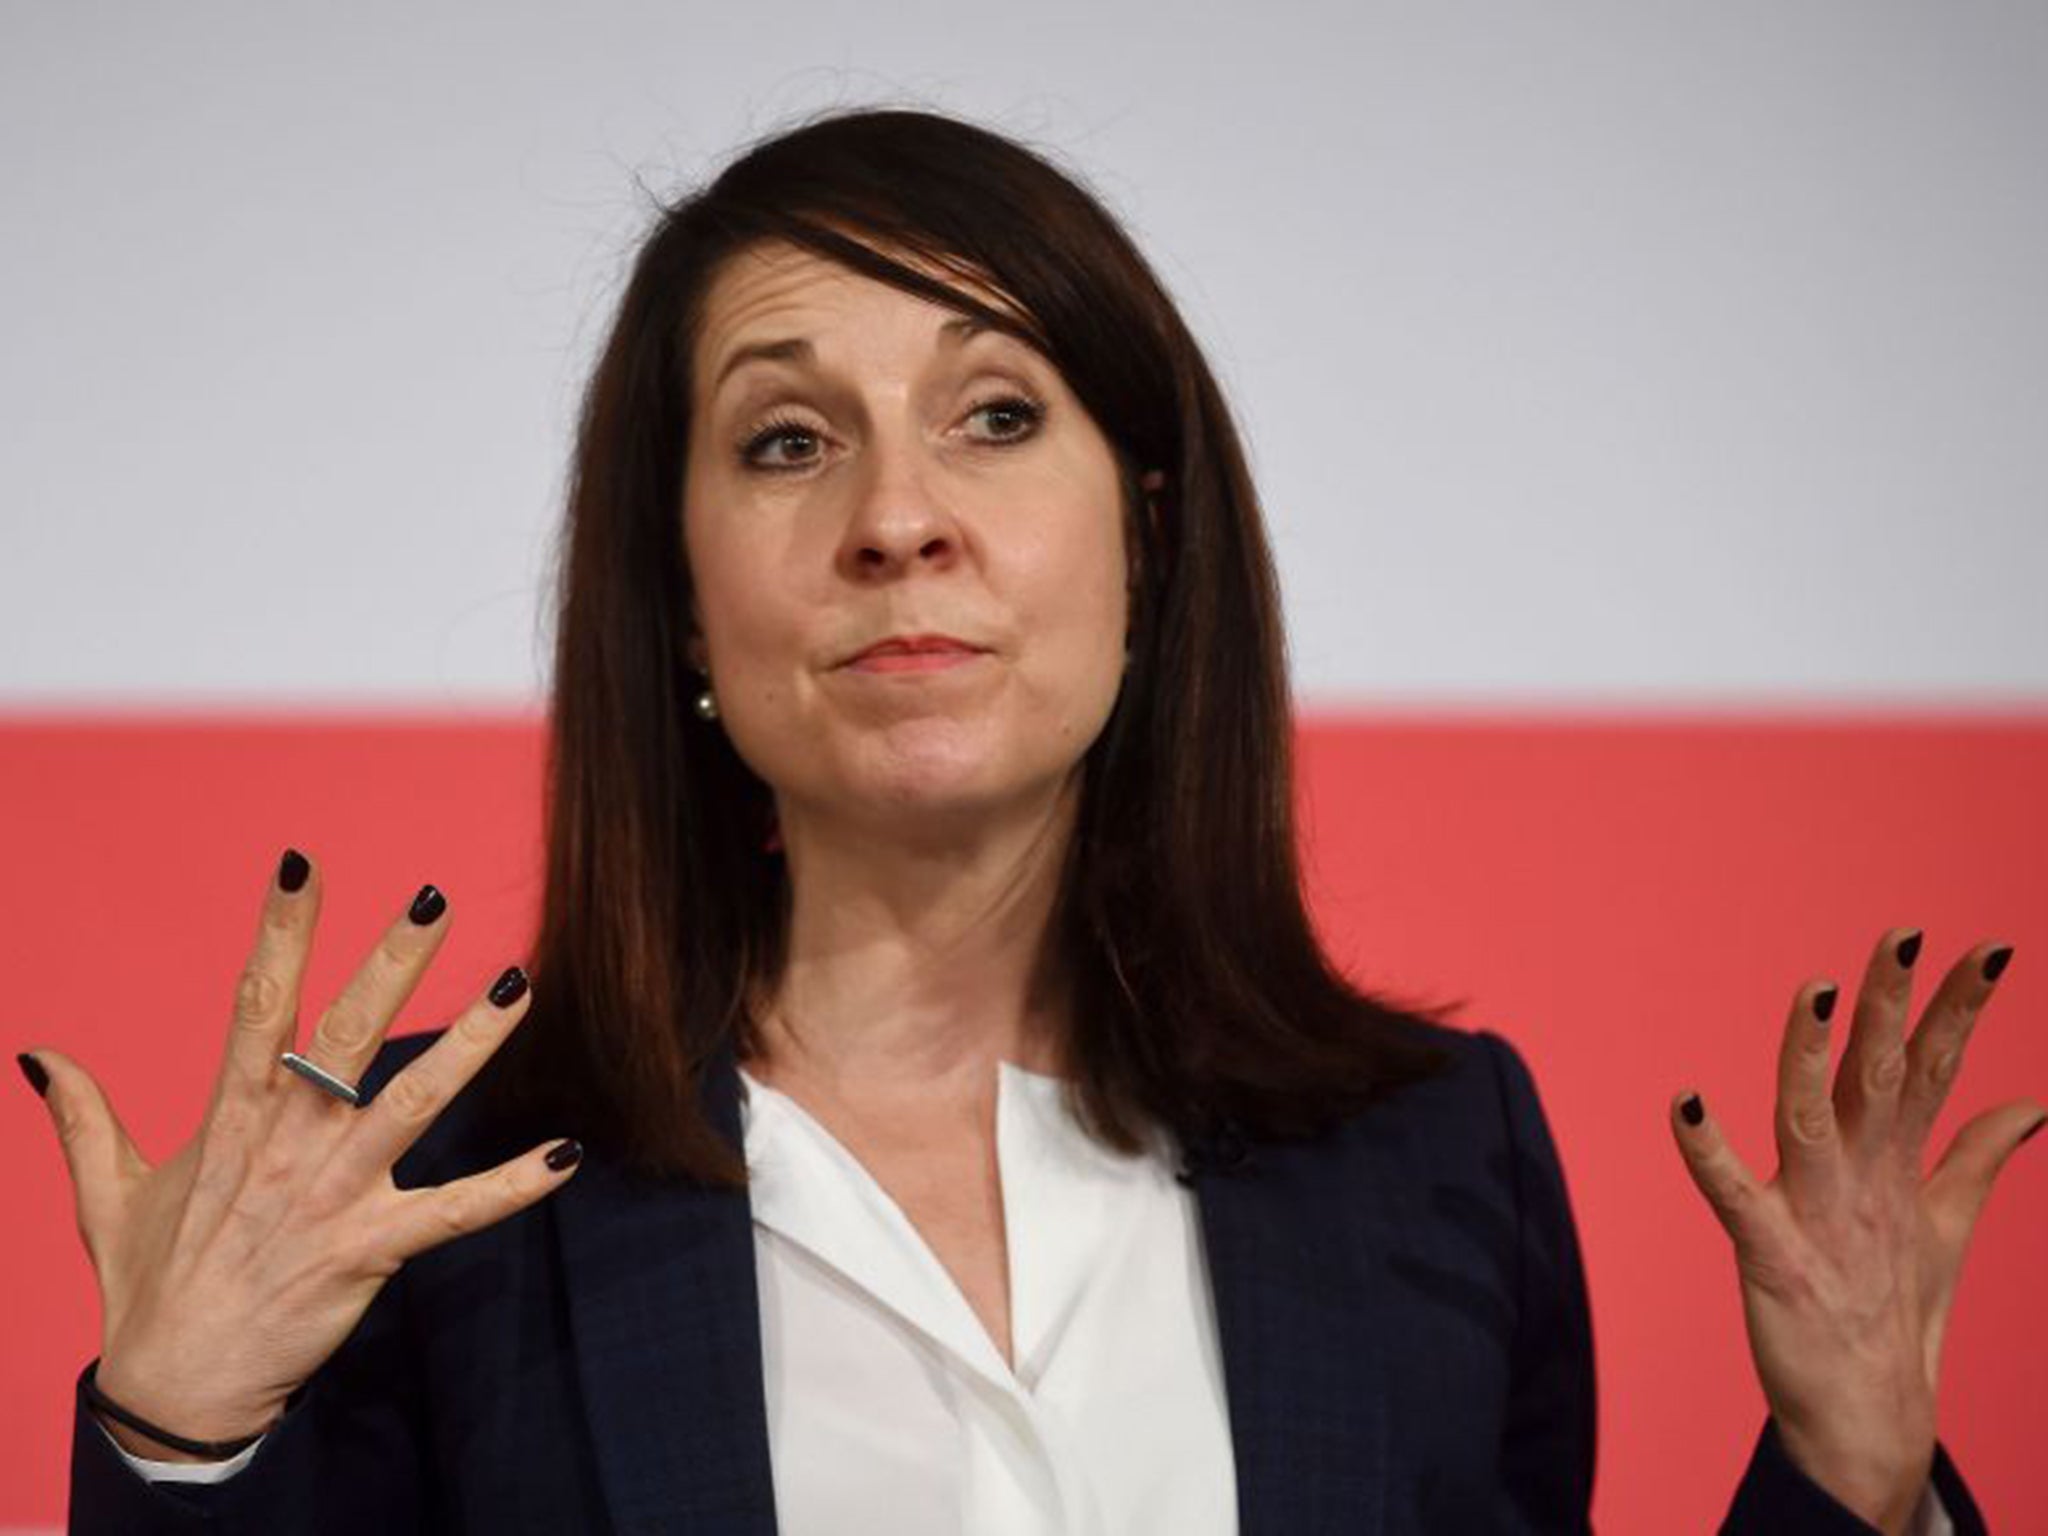 Liz Kendall faces opposition from many within the Labour Party to ‘English votes for English laws’